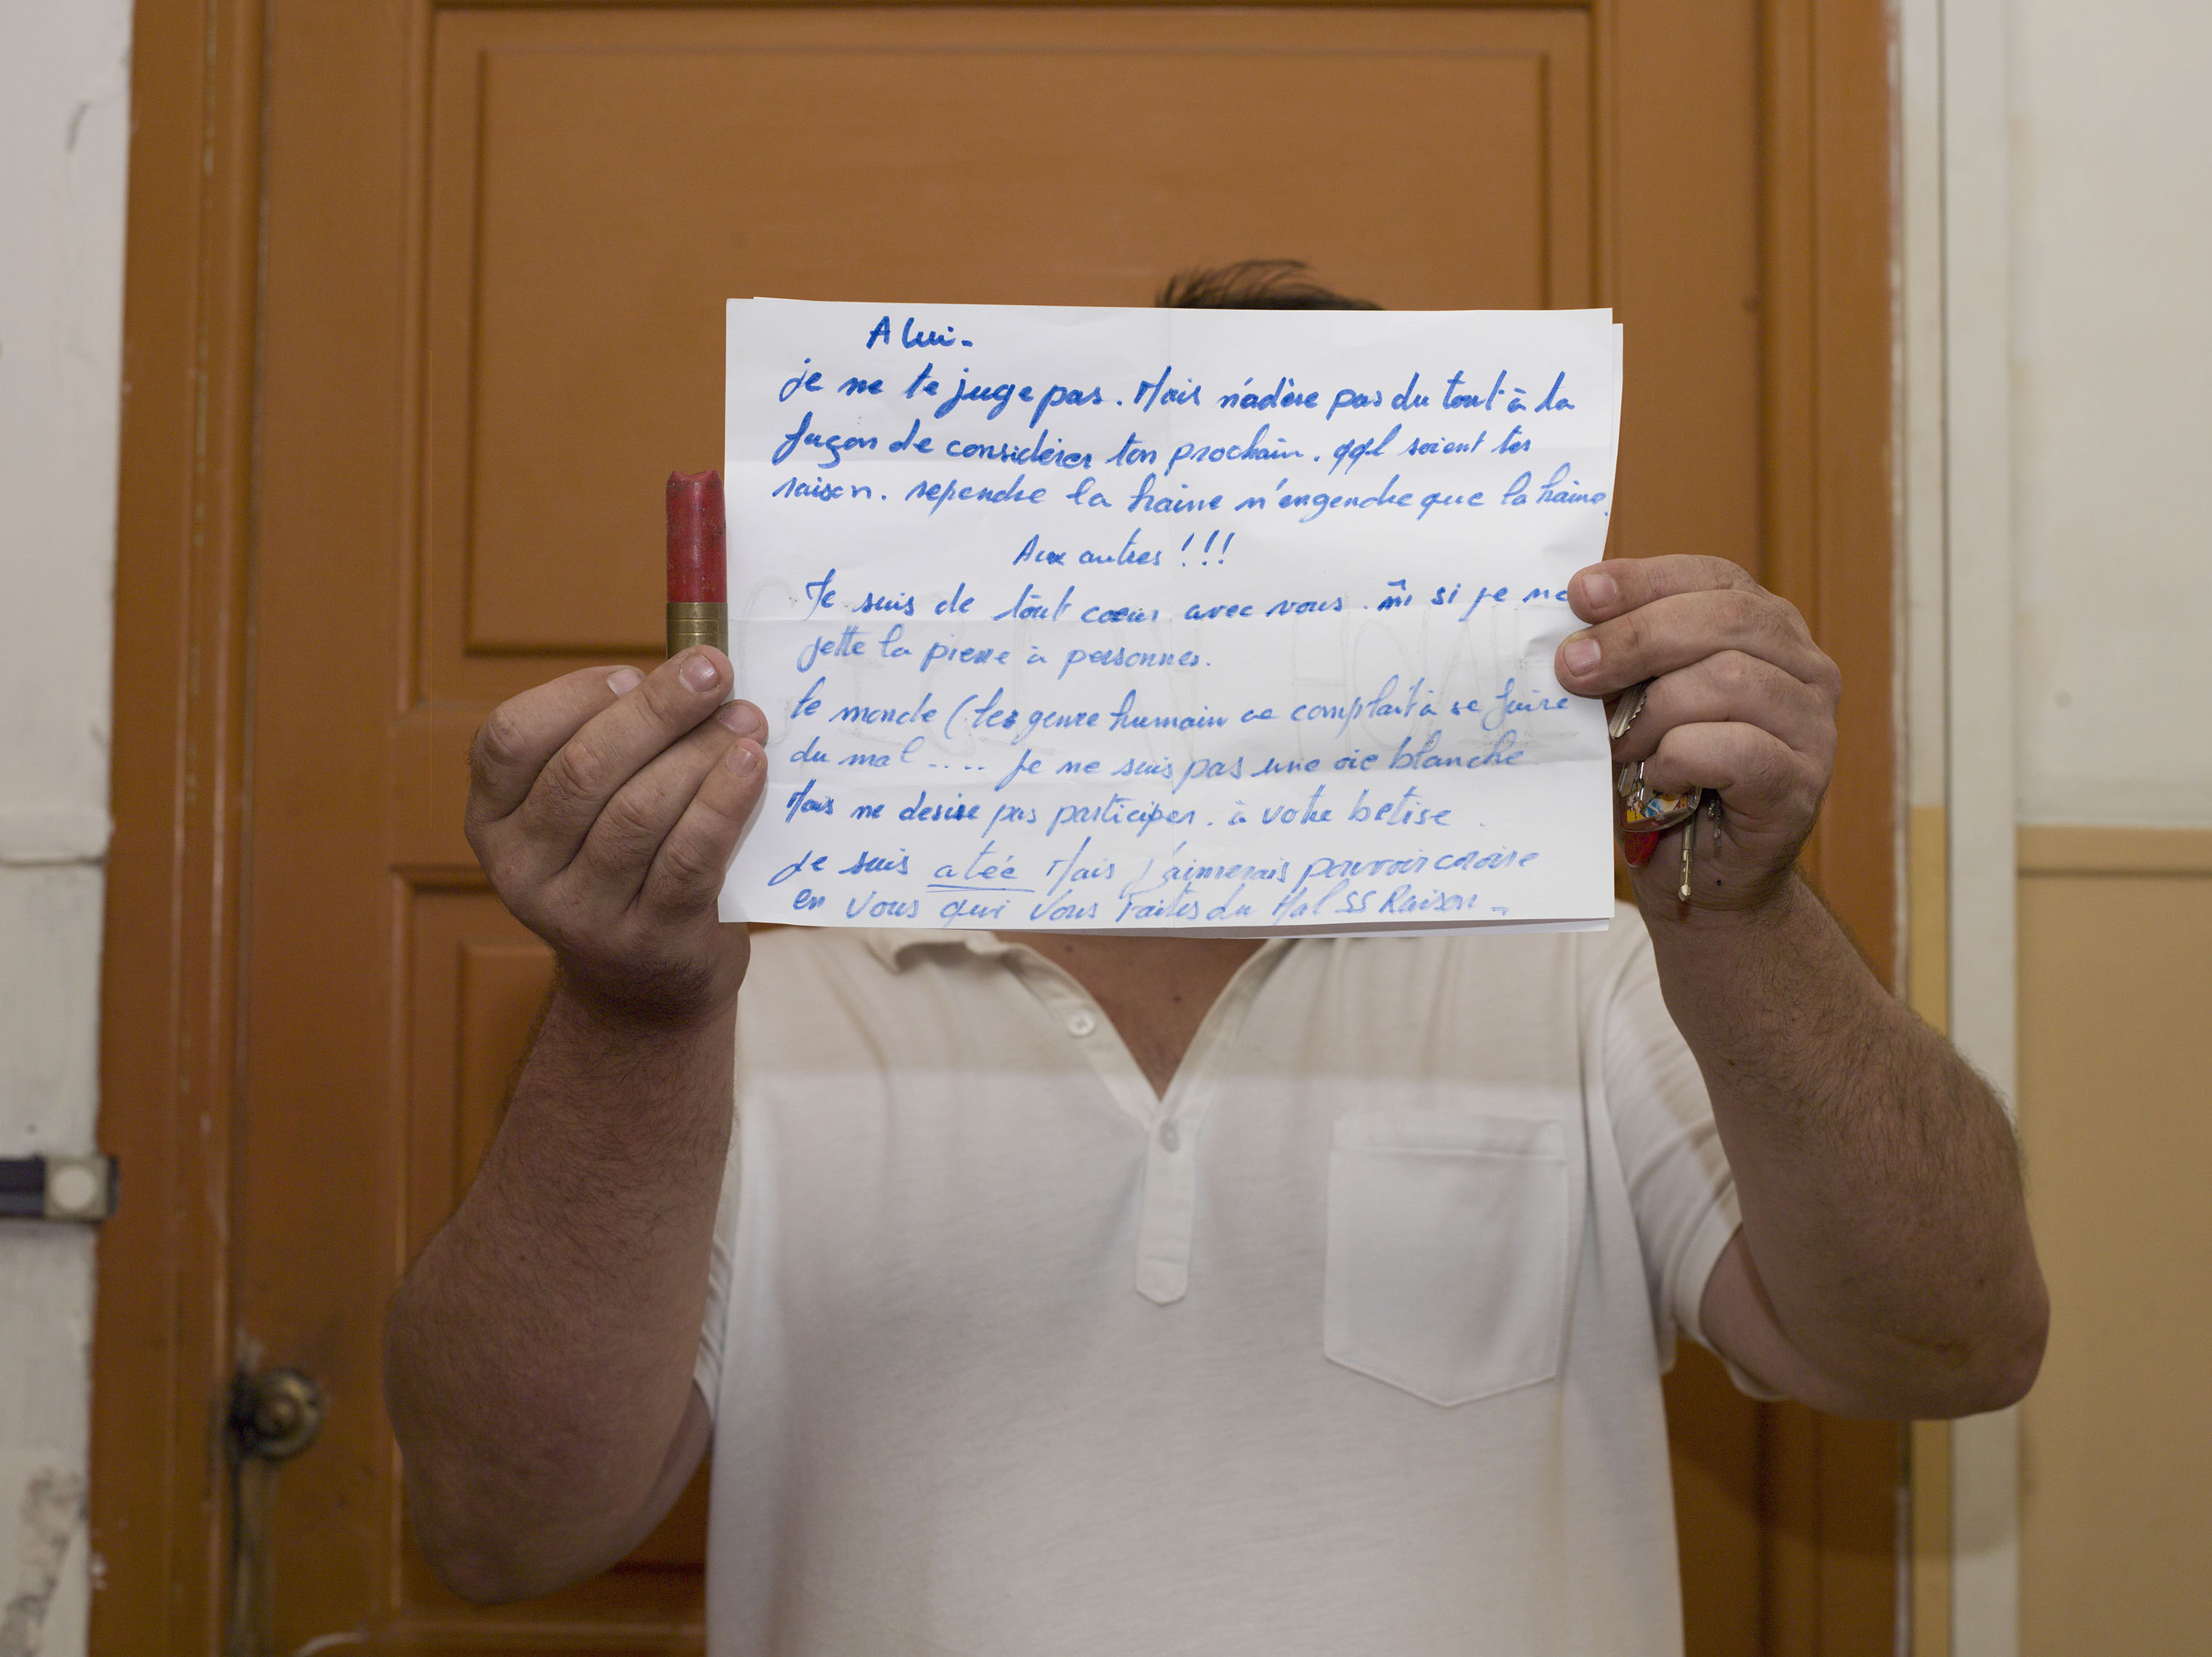 A neighbor, who didn't want to be identified holds a sign, in front of Mohamed Lahouaiej Bouhlel's doorway. Bouhlel was the driver of a truck that plowed into a crowd on the waterfront in Nice, France, killing 84 people. Holding a bullet shell from the police's forced entrance, he holds a sign that reads: 